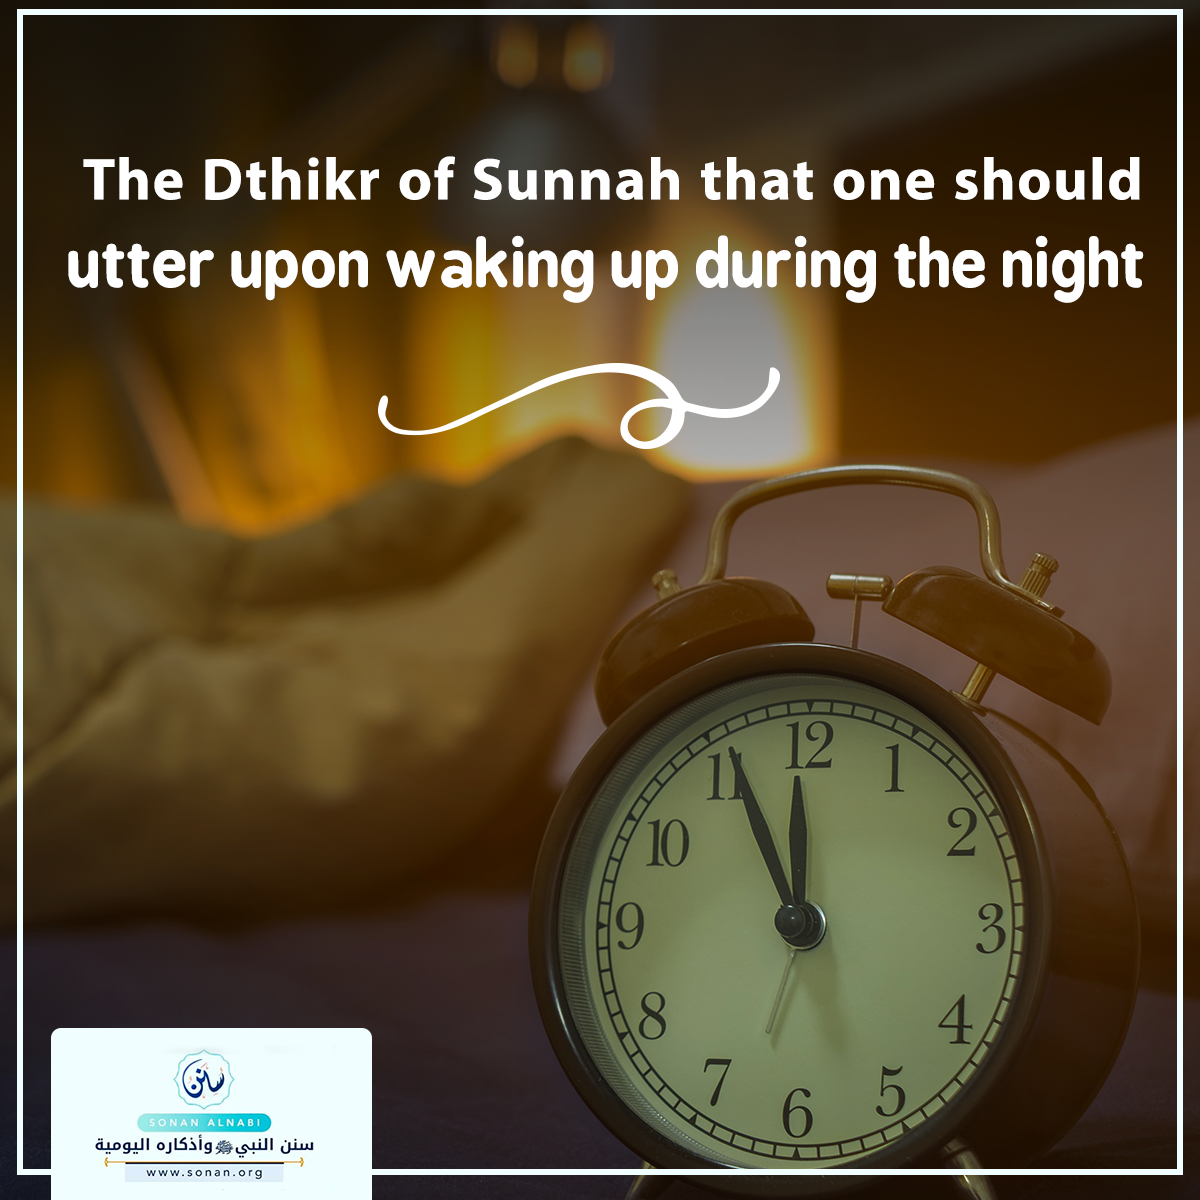 The Dthikr of Sunnah that one should utter upon waking up during the night